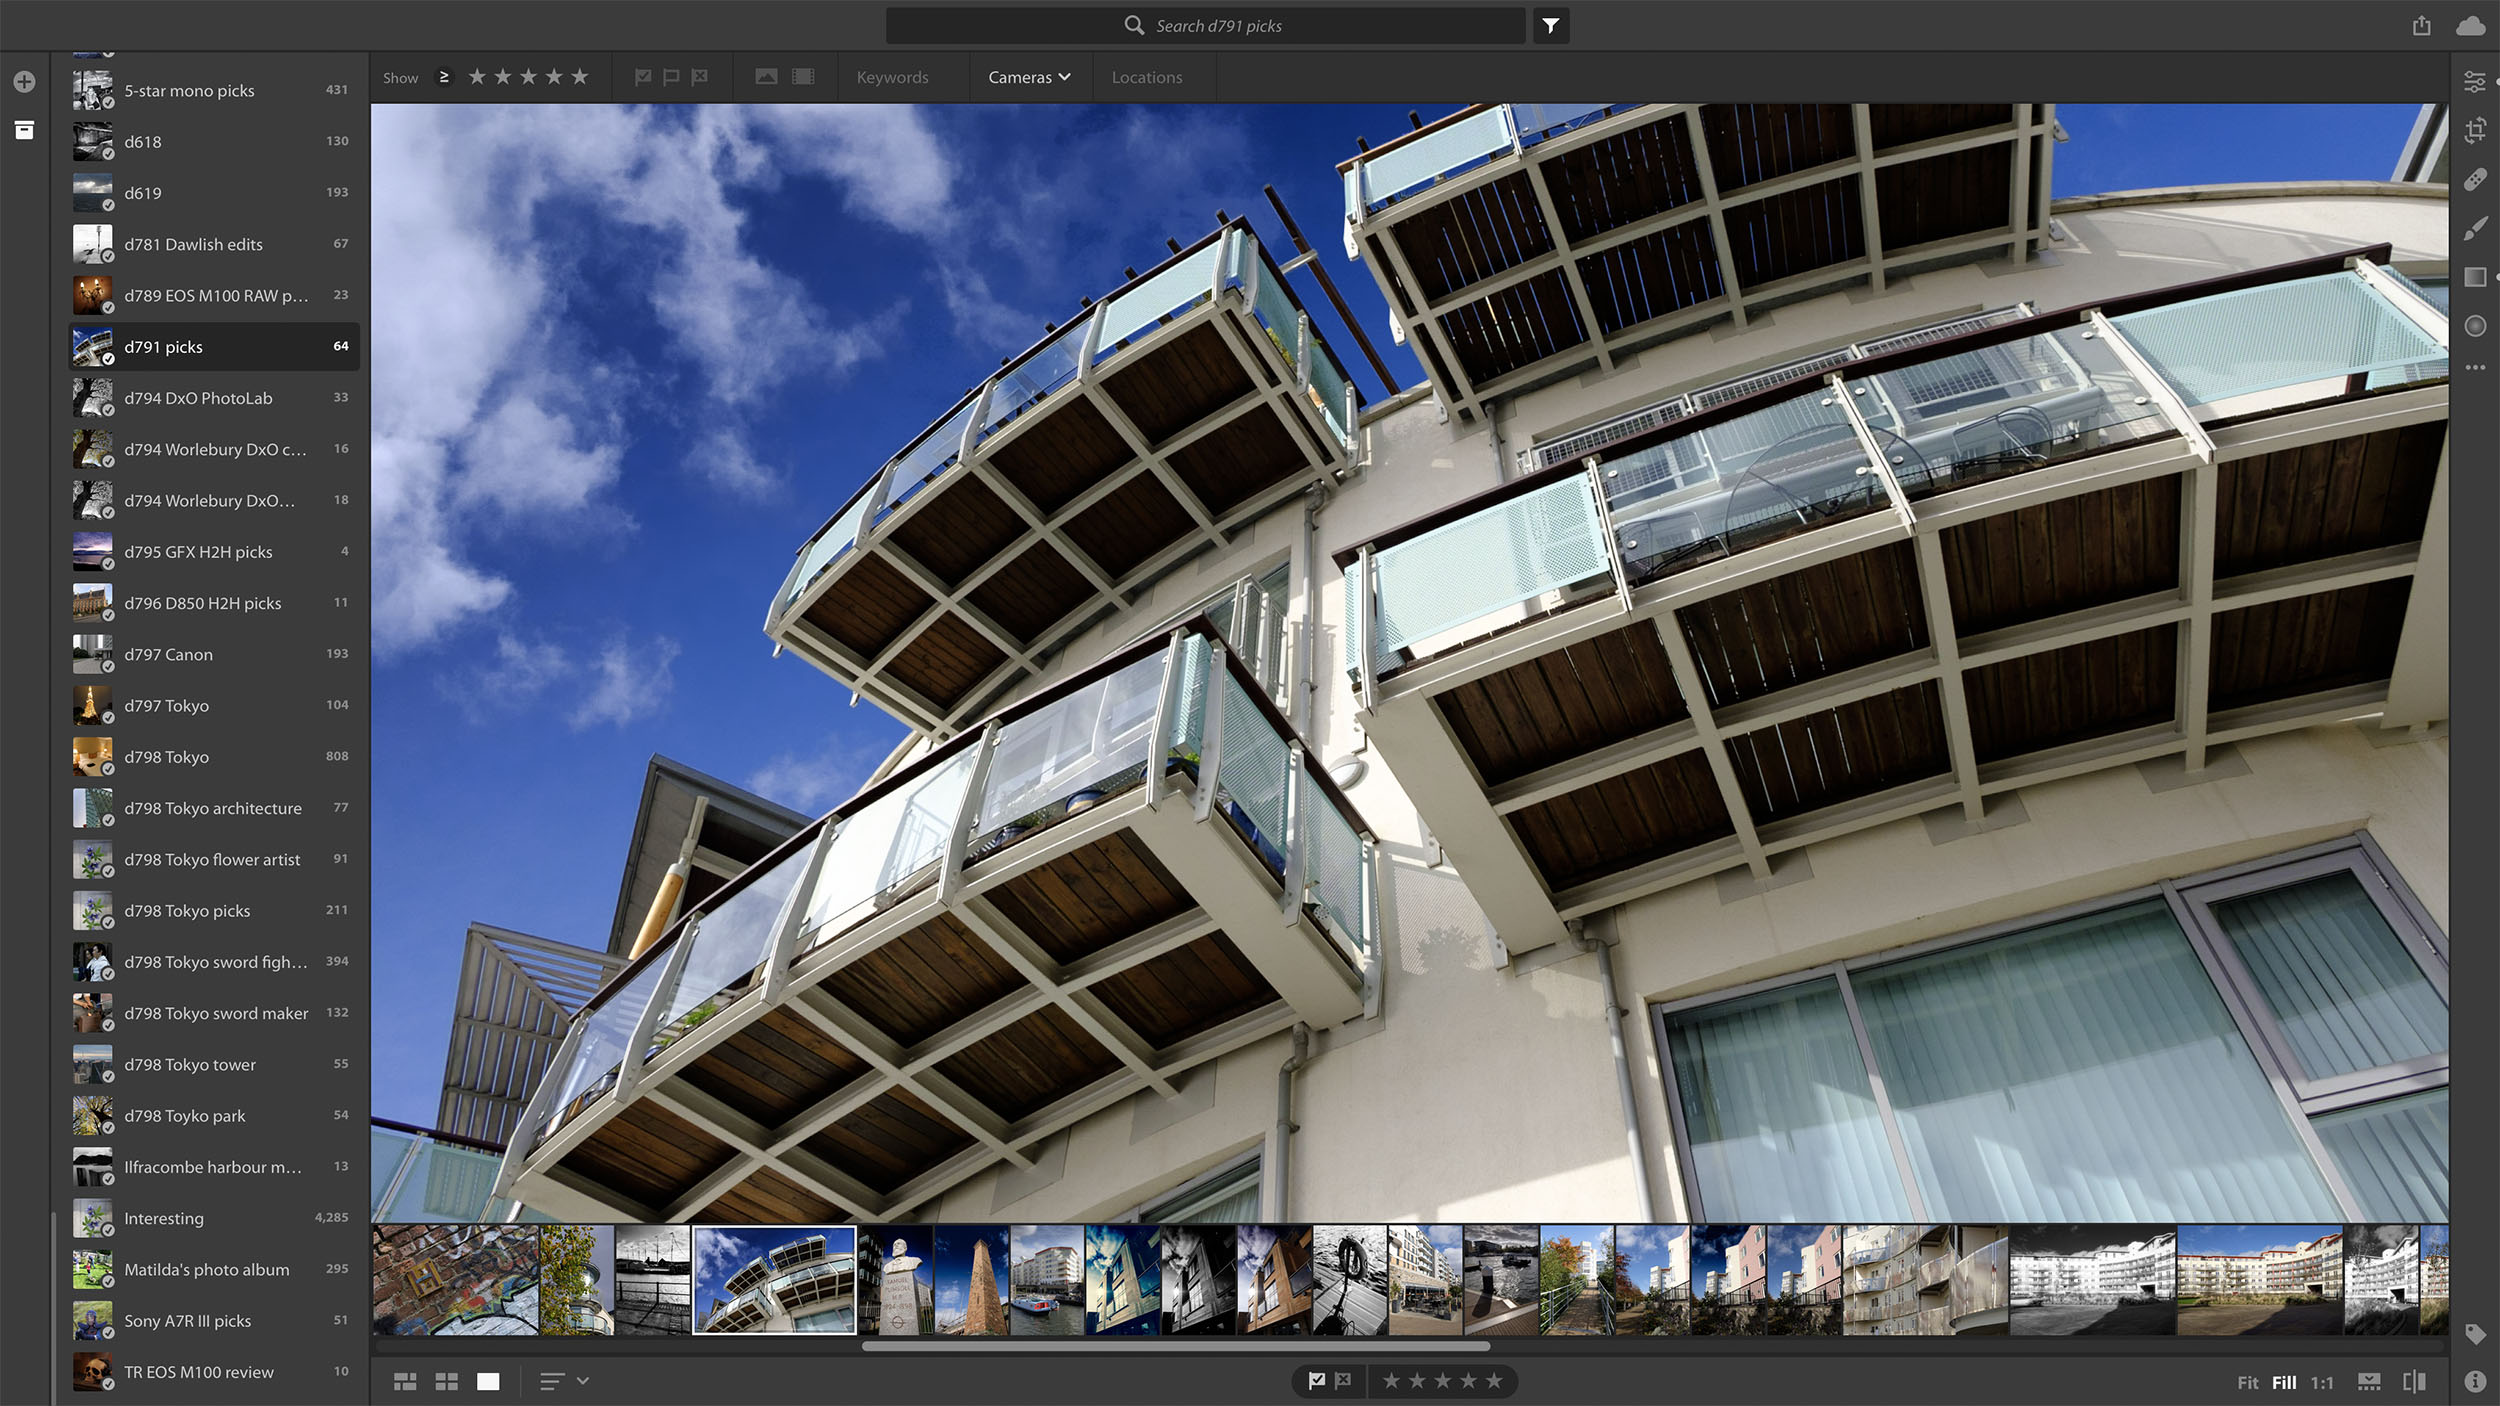 Lightroom for Android 2.0 delivers raw power to your smartphone camera | TechRadar